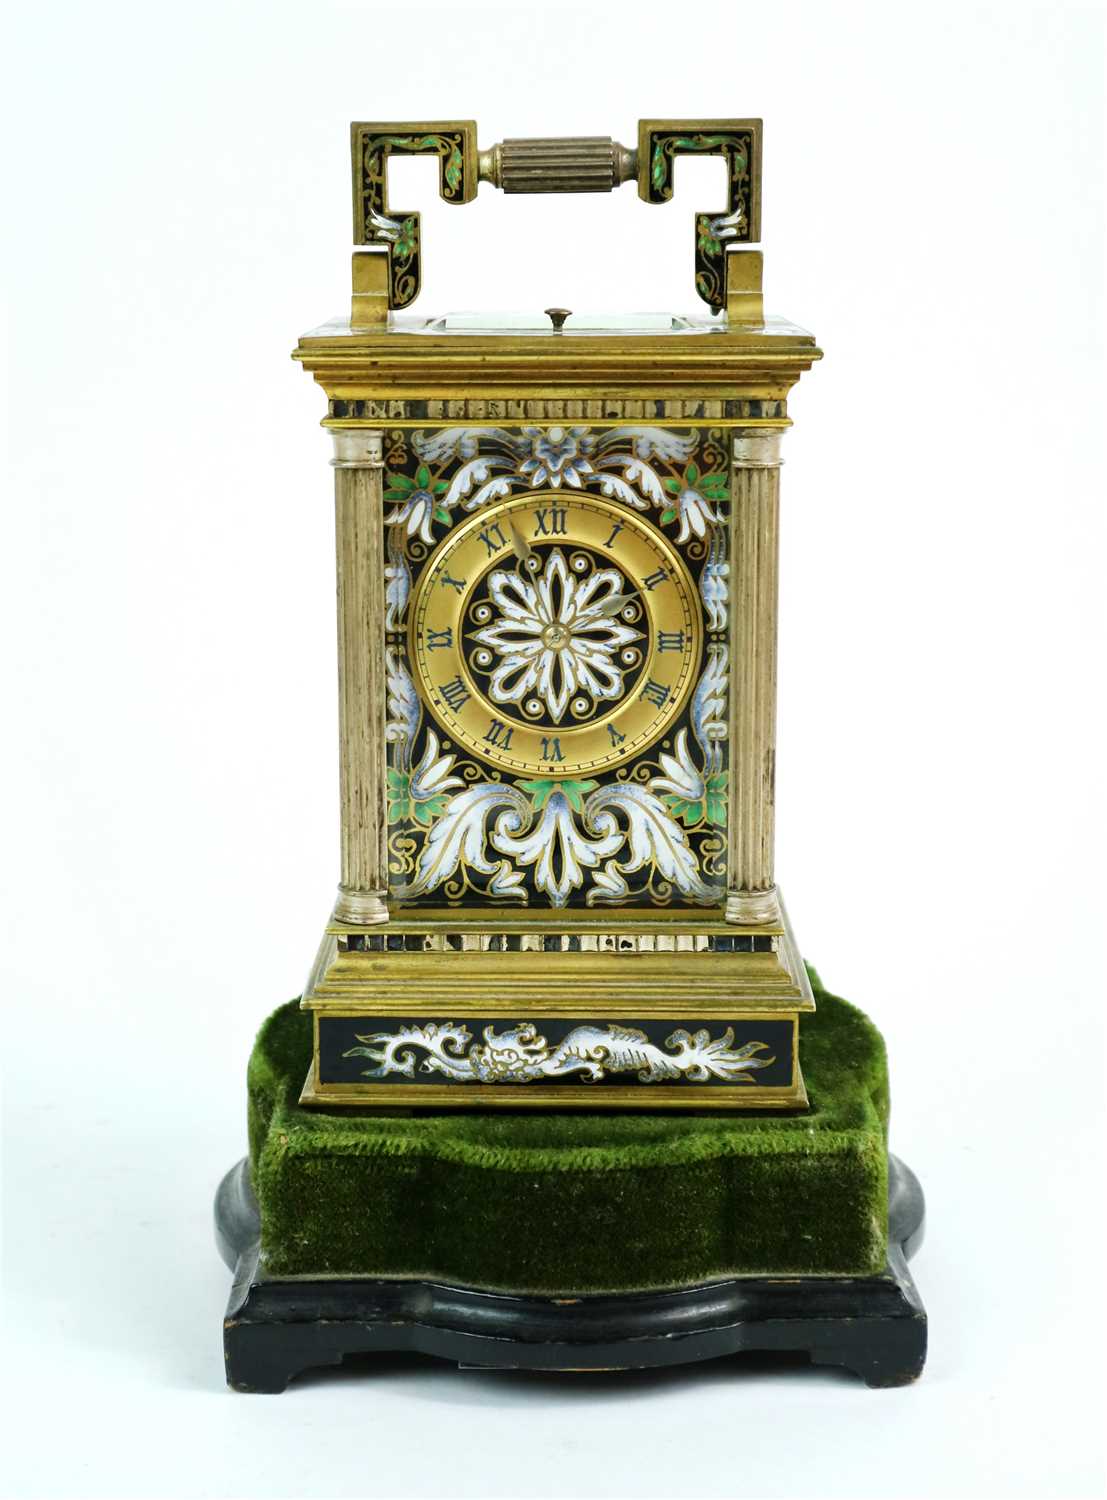 211 - A French mid-late 19th century champleve enamel cased carriage clock on stand